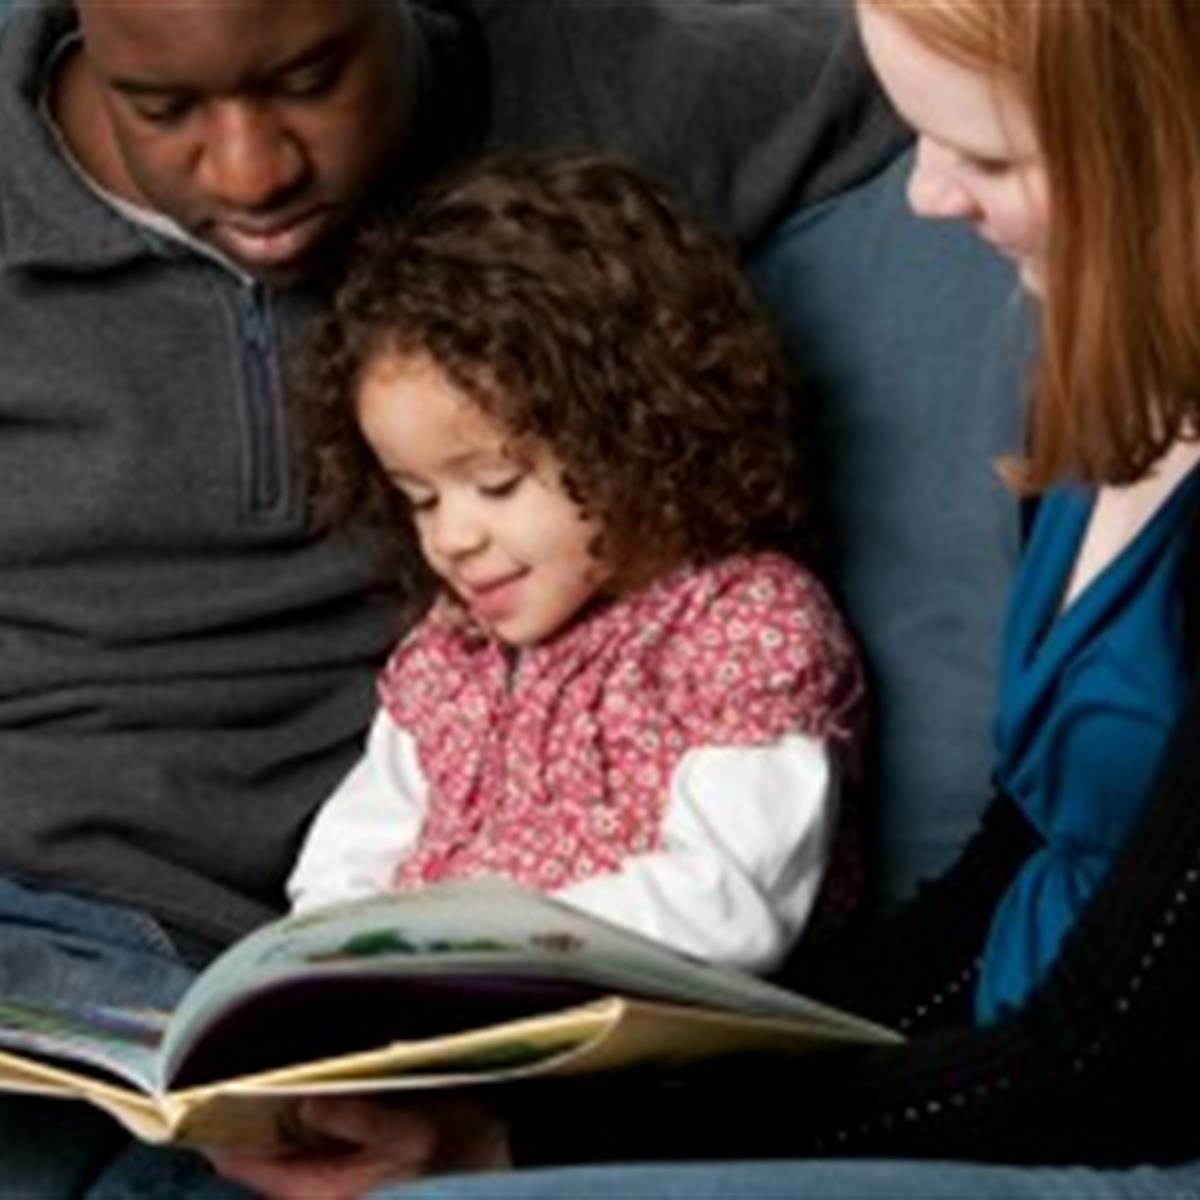 Recommended Reading Books To Build Character Teach Your Child Important Values Healthychildren Org